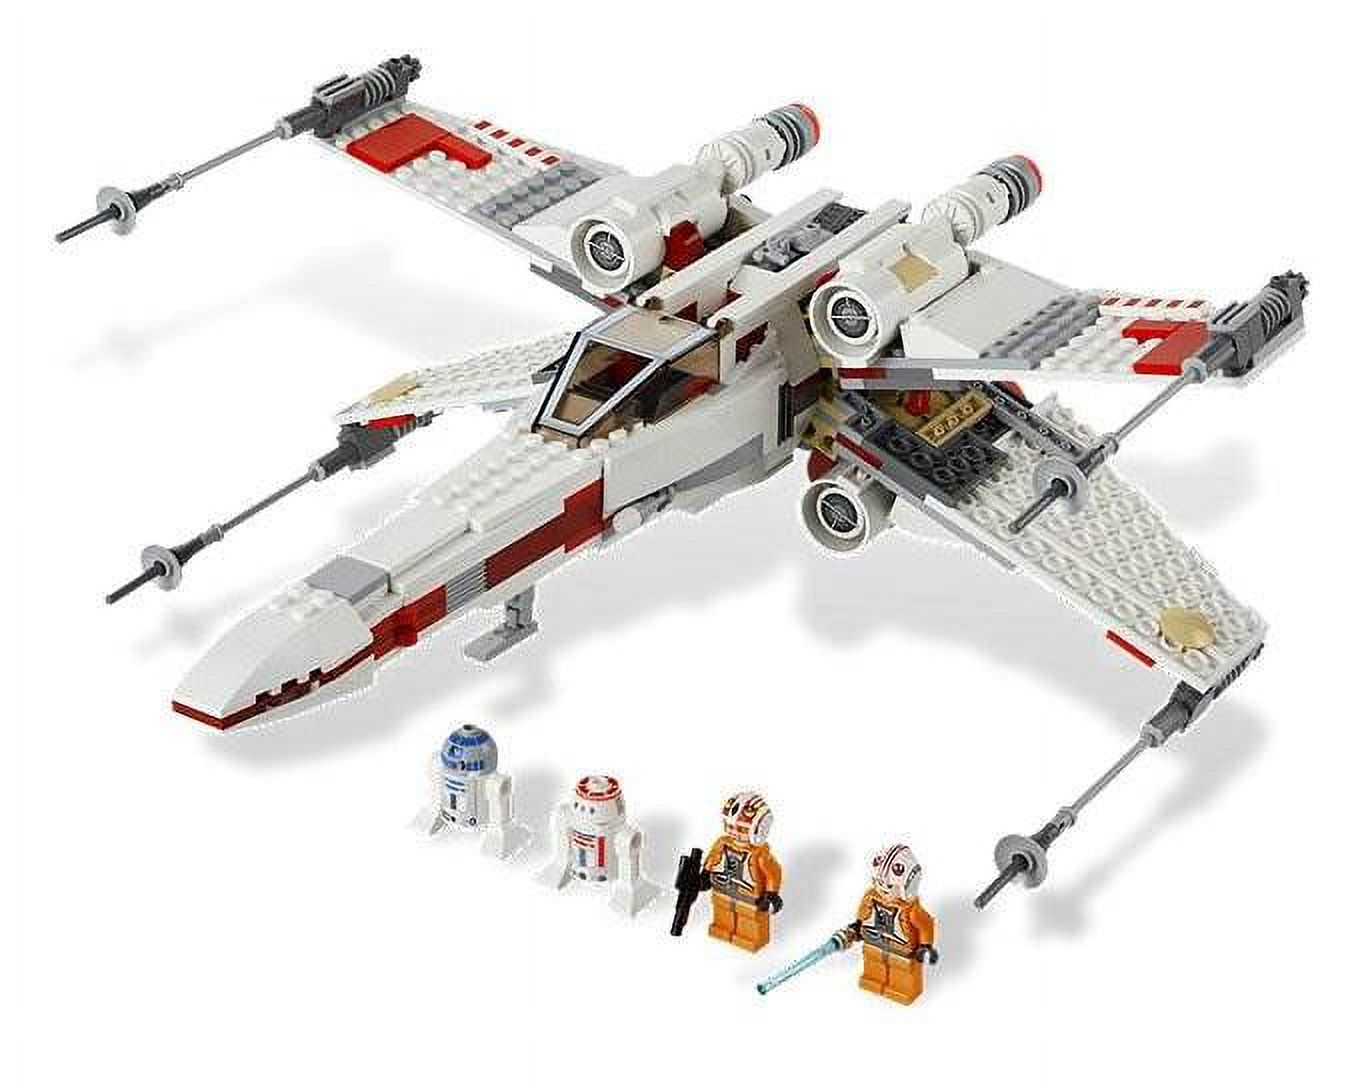 LEGO® Star Wars X-Wing Starfighter Spaceship with 4 Minifigures | 9493 - image 1 of 6